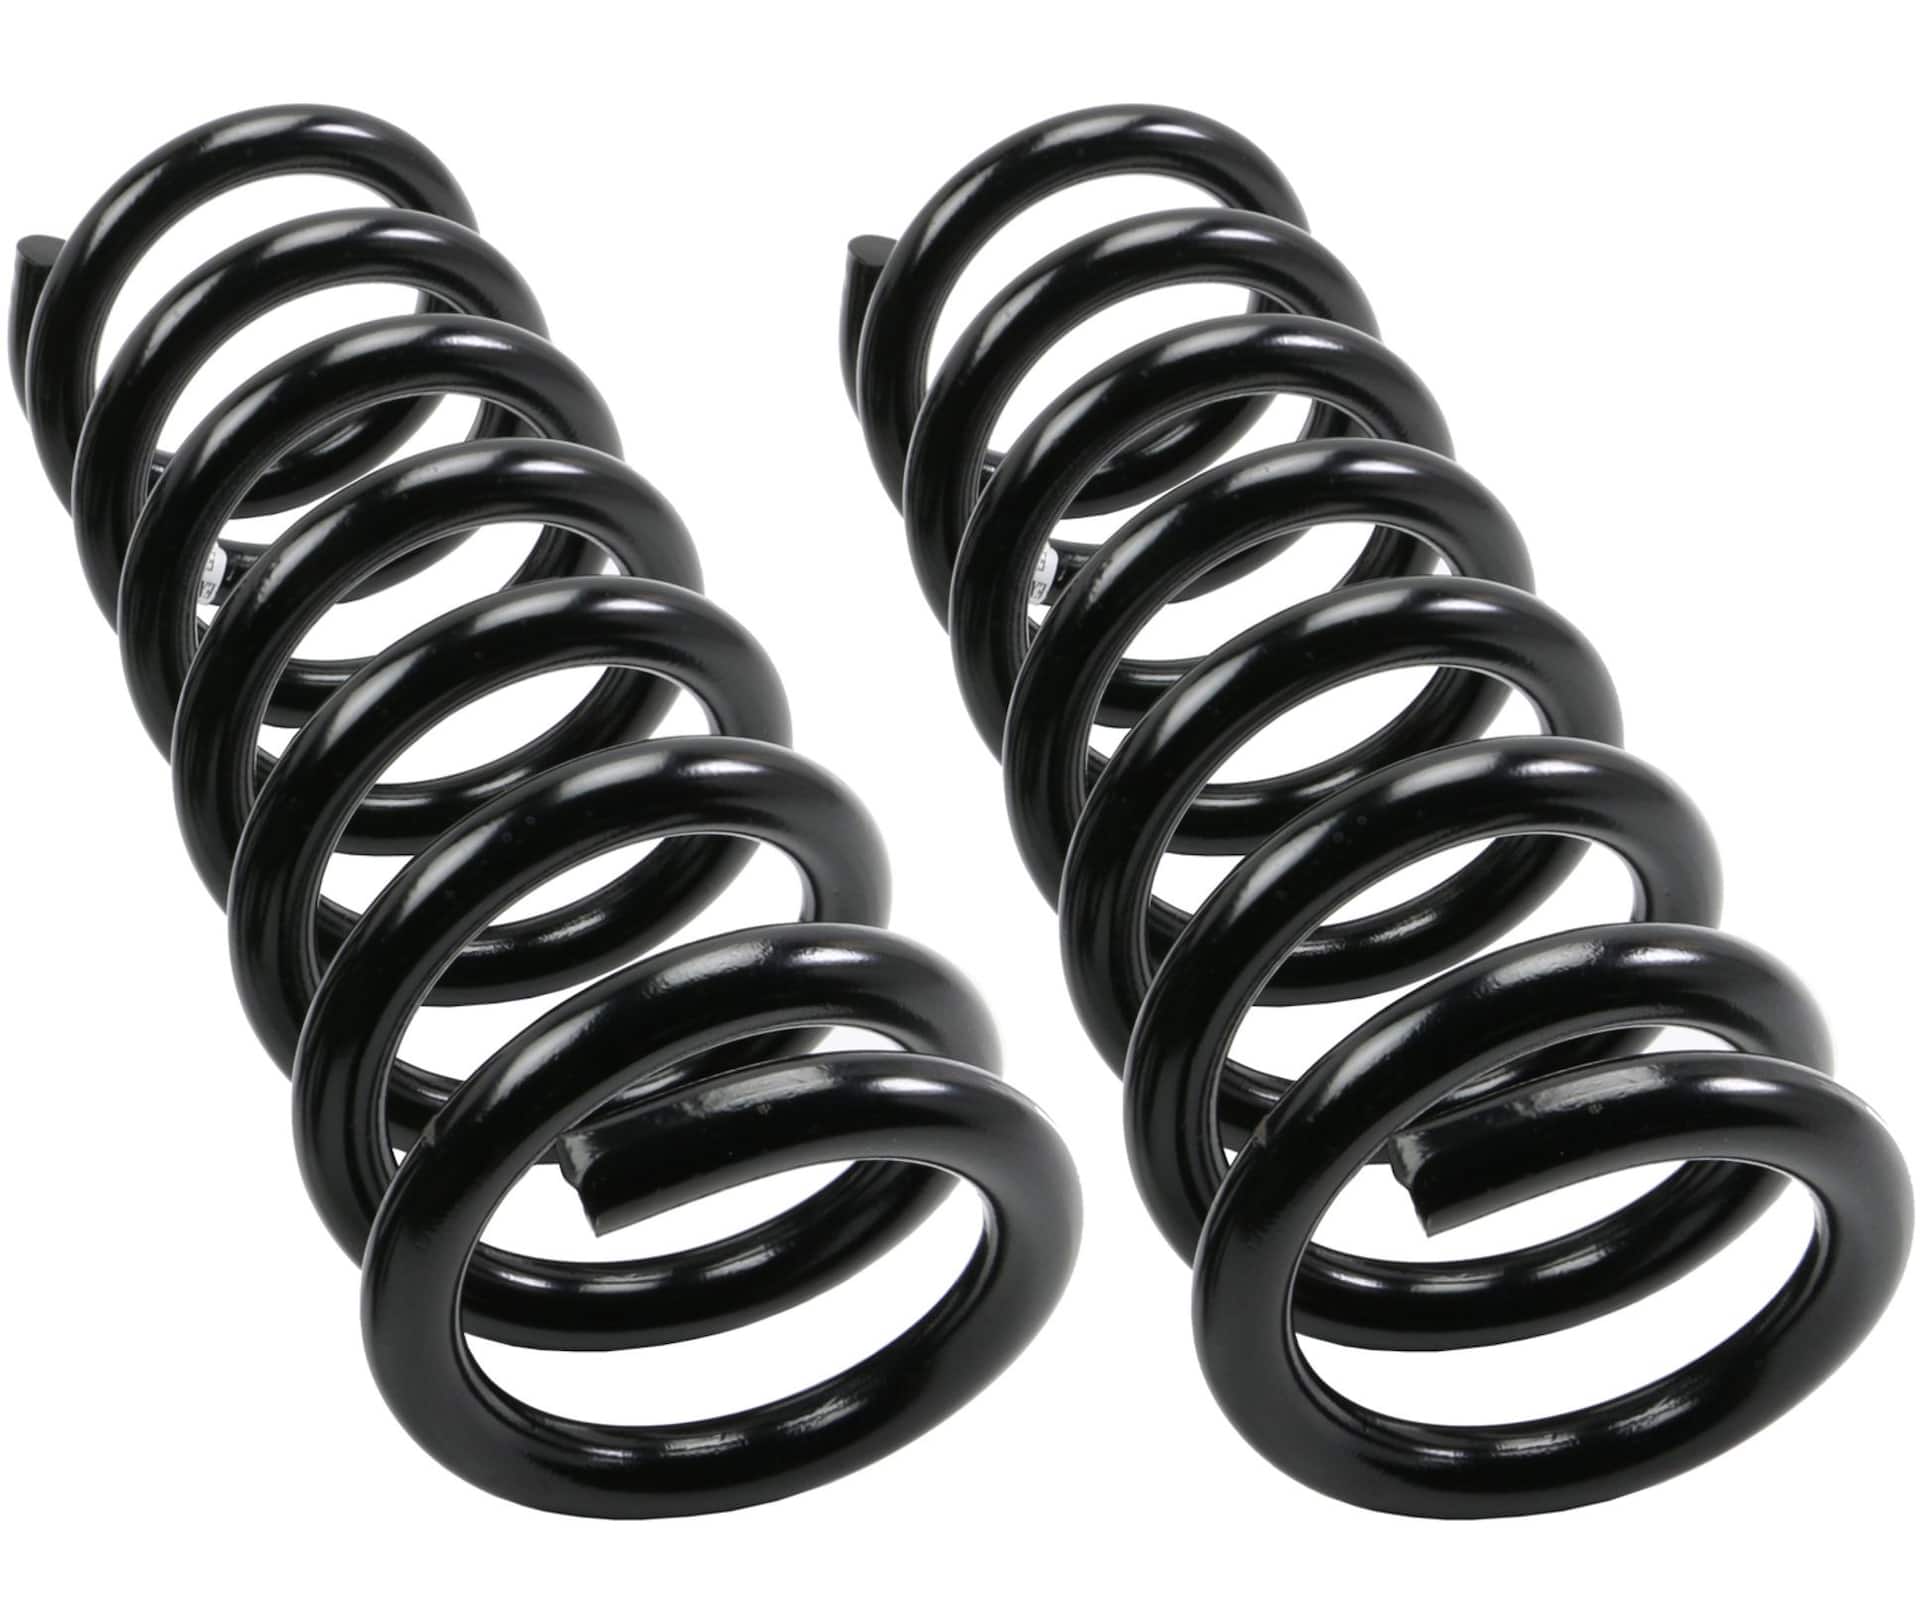 https://media-www.canadiantire.ca/product/automotive/heavy-auto-parts/steering-suspension/0226210/amg60148-coil-spring-bcba5872-cee5-400d-9e8c-d9500b83125d-jpgrendition.jpg